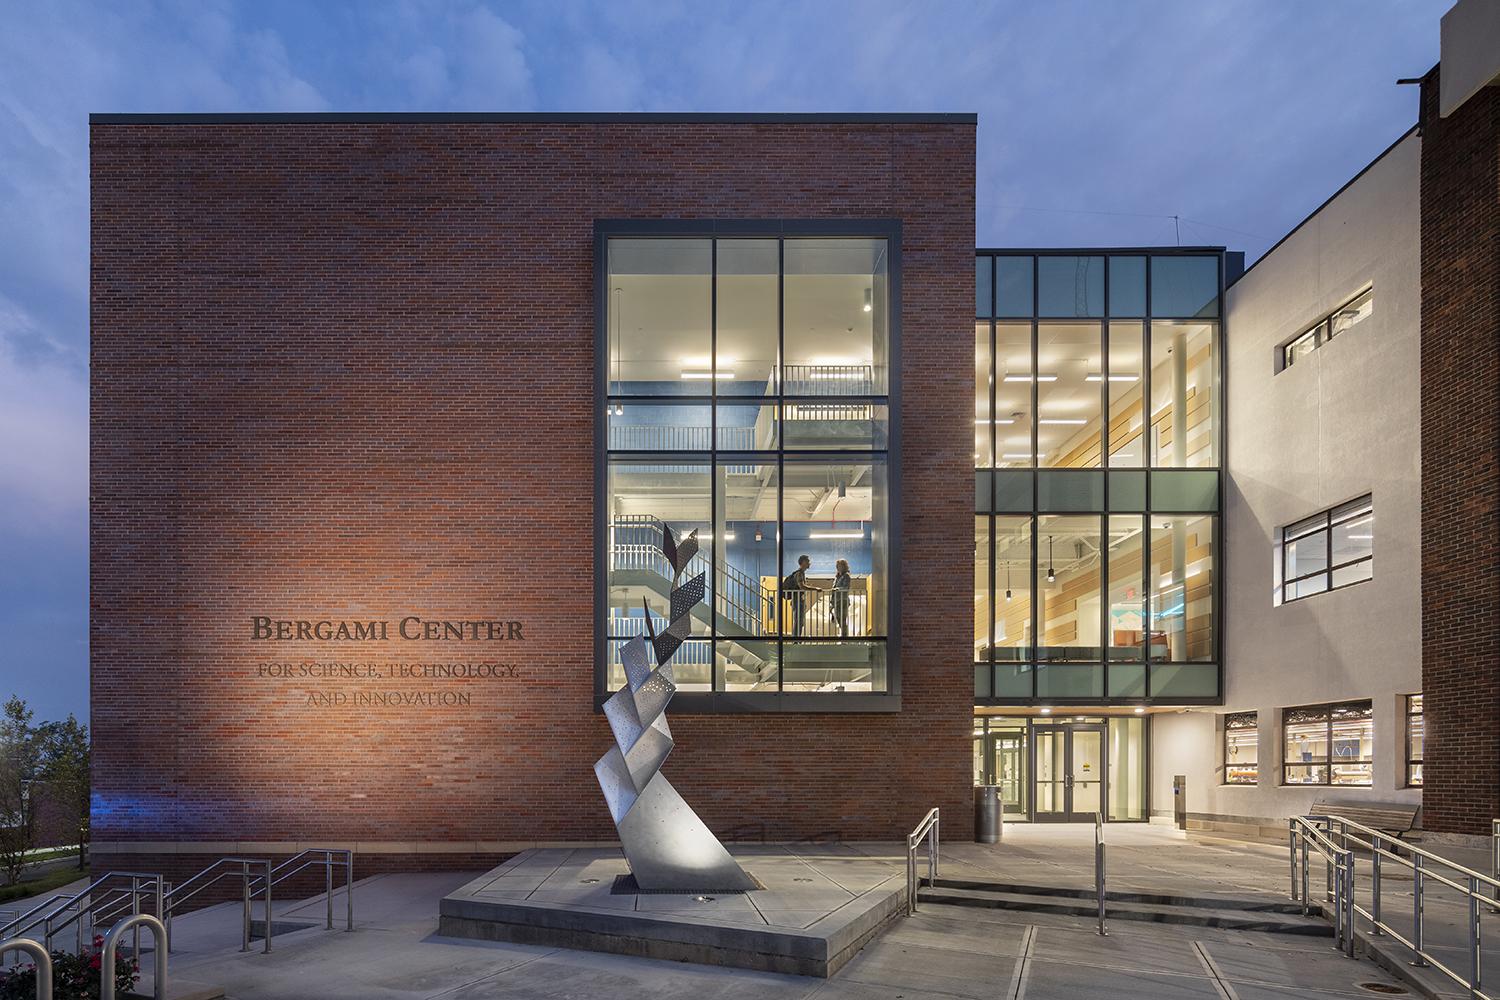 Bergami Center for Science, Technology & Innovation | Svigals + Partners